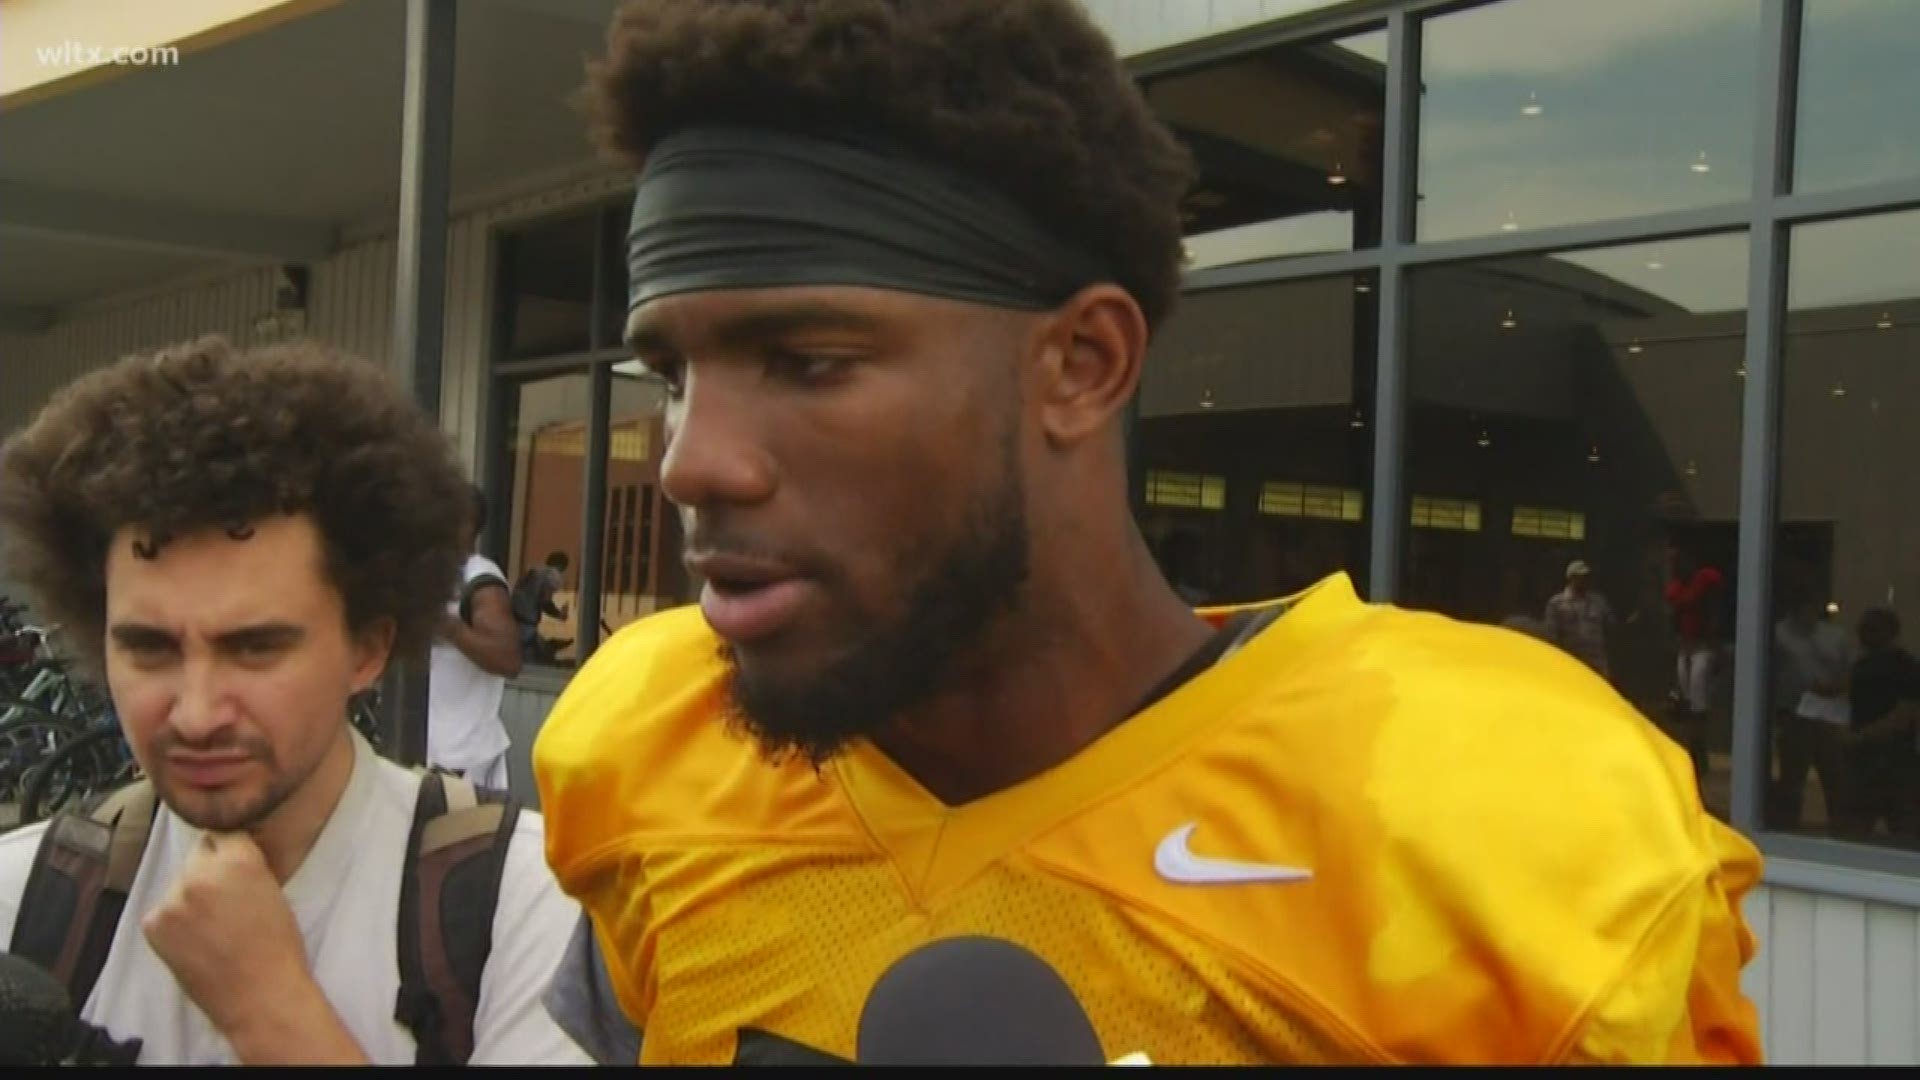 Former Clemson quarterback Kelly Bryant will be on the field for Missouri today when the Gamecocks come to Faurot Field